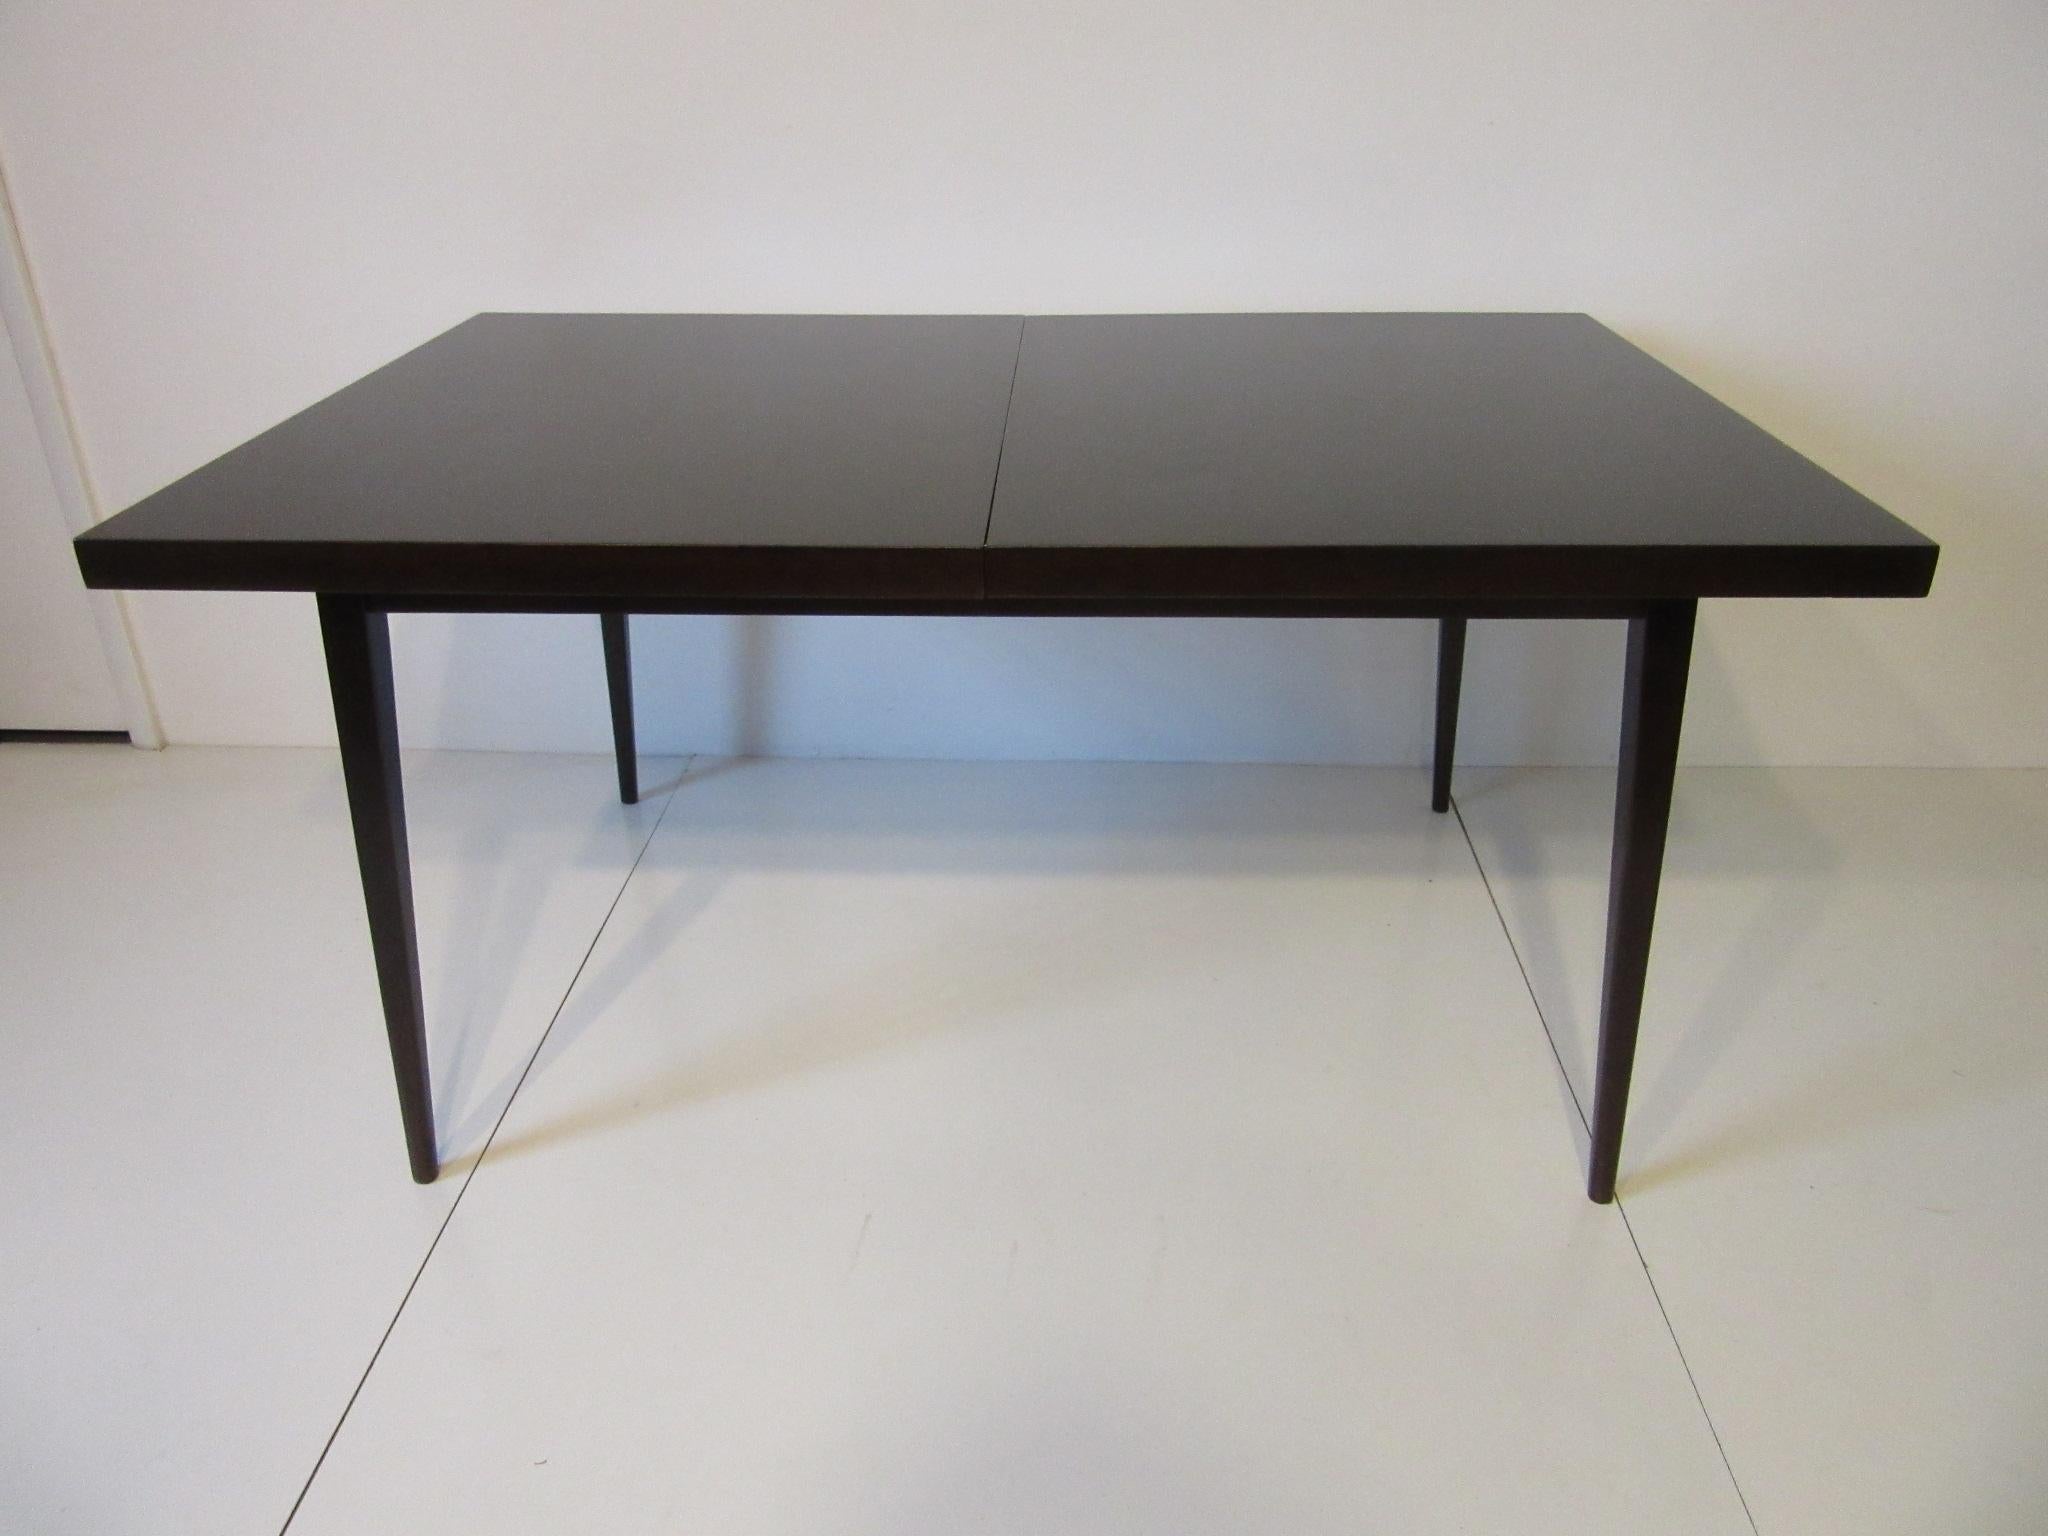 A dark ebony finished dining table with two 12